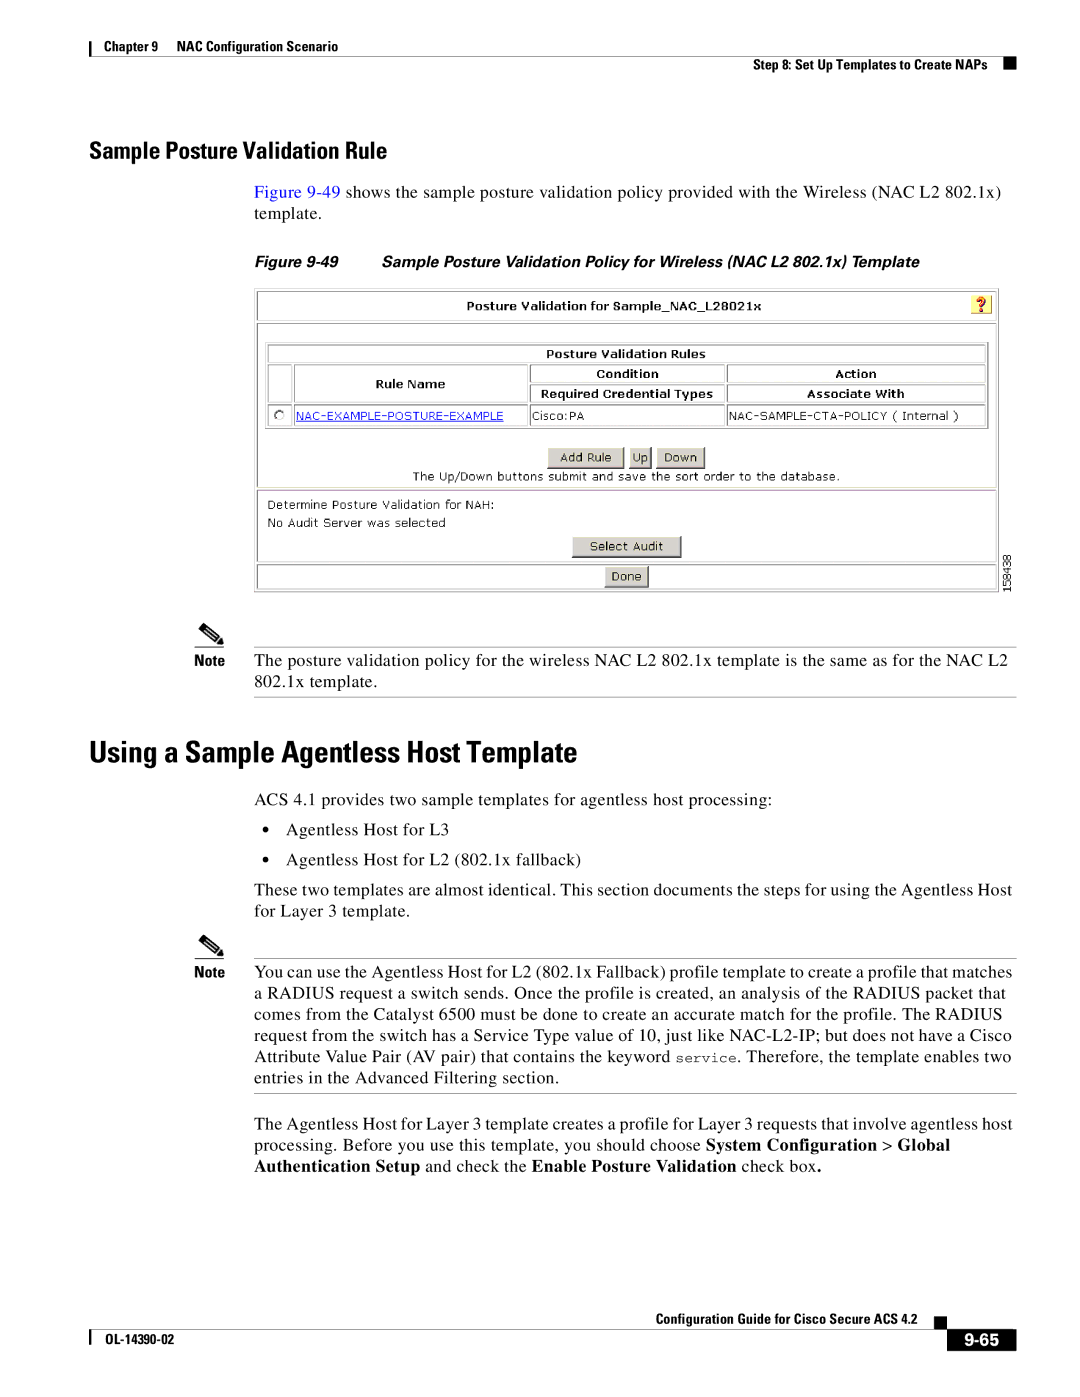 Cisco Systems 4.2 manual Using a Sample Agentless Host Template, Sample Posture Validation Rule 